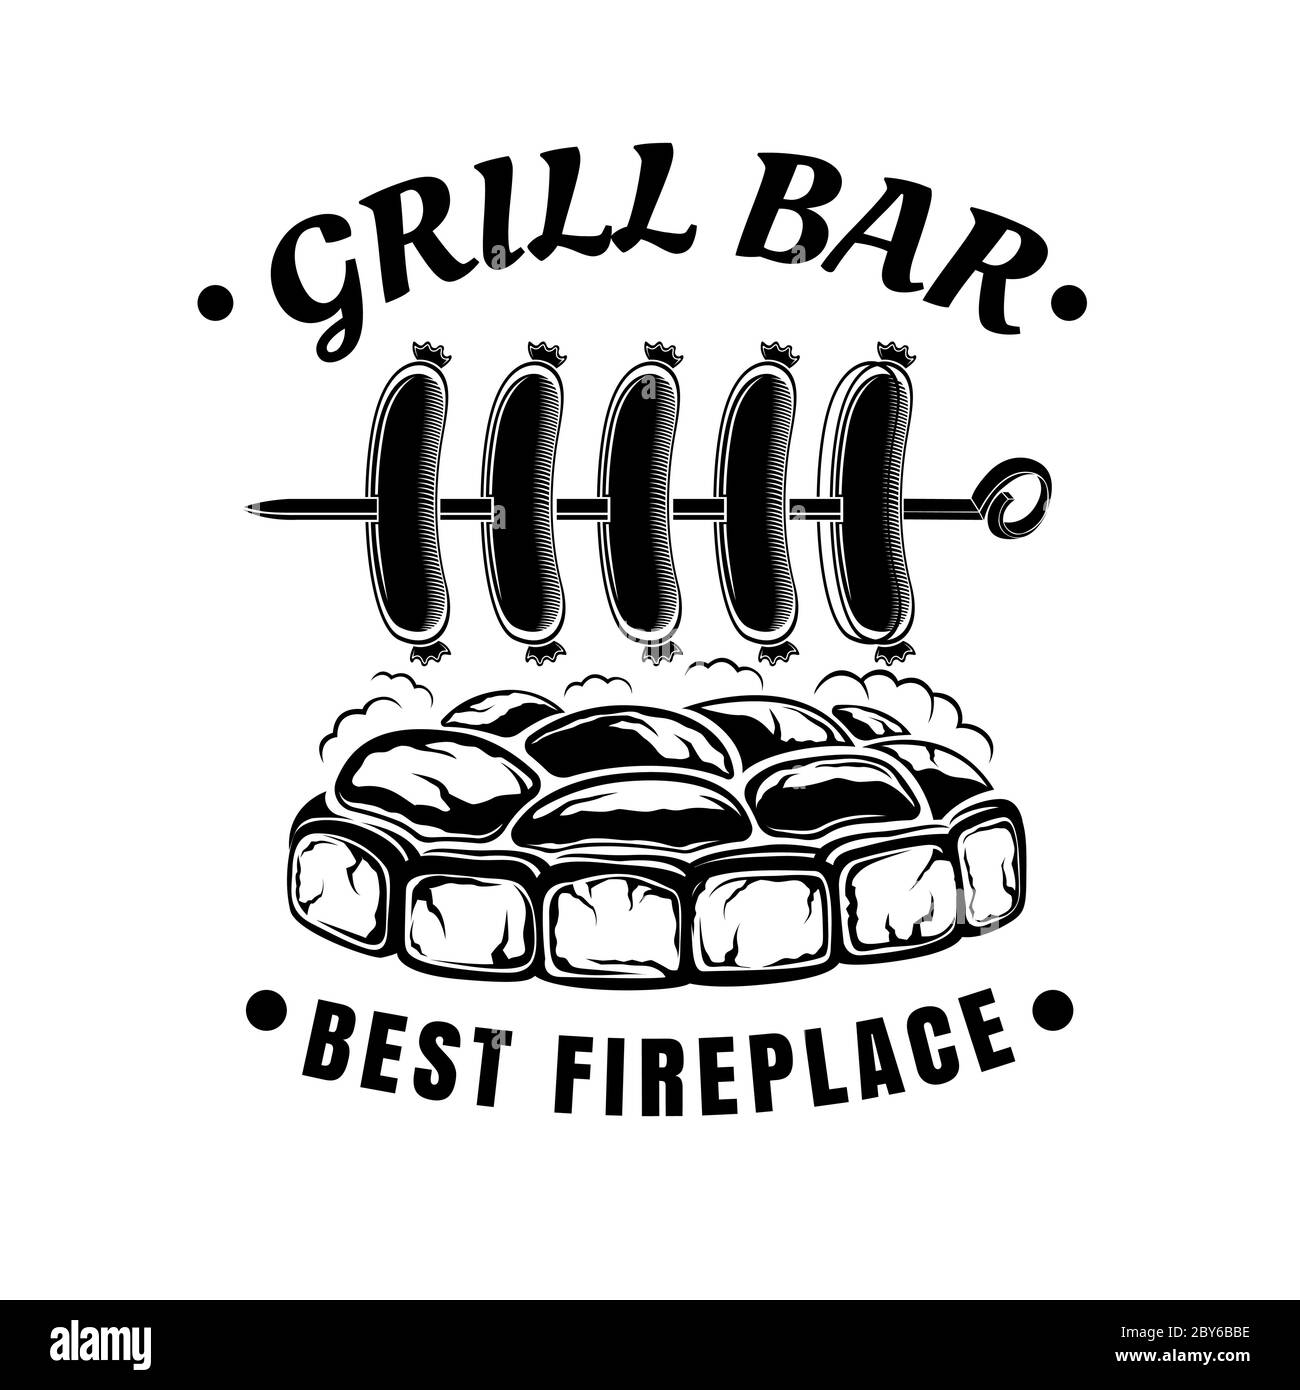 Label for grill bar, BBQ or public house. Sausages strung on skewers grilled on charcoal Stock Vector